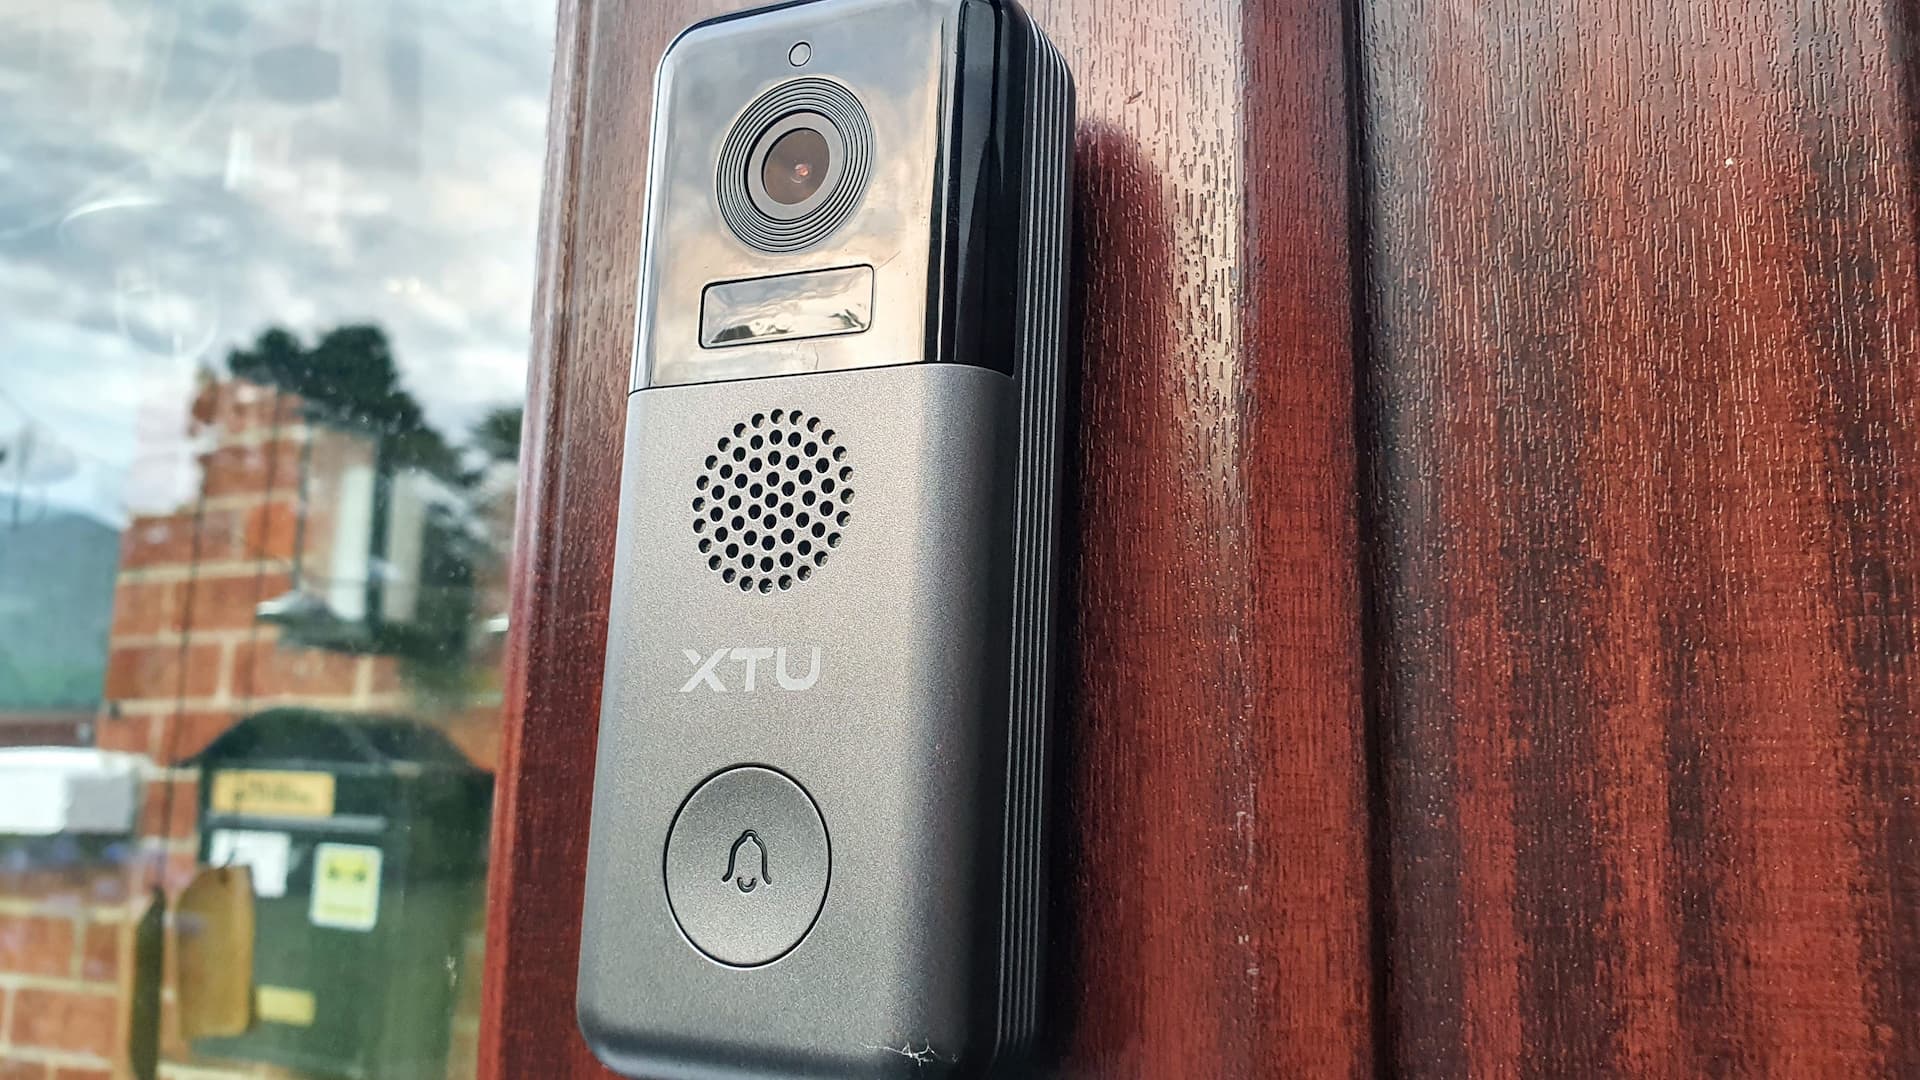 XTU J6 Smart Doorbell – Out of the box, on the wall and tested.